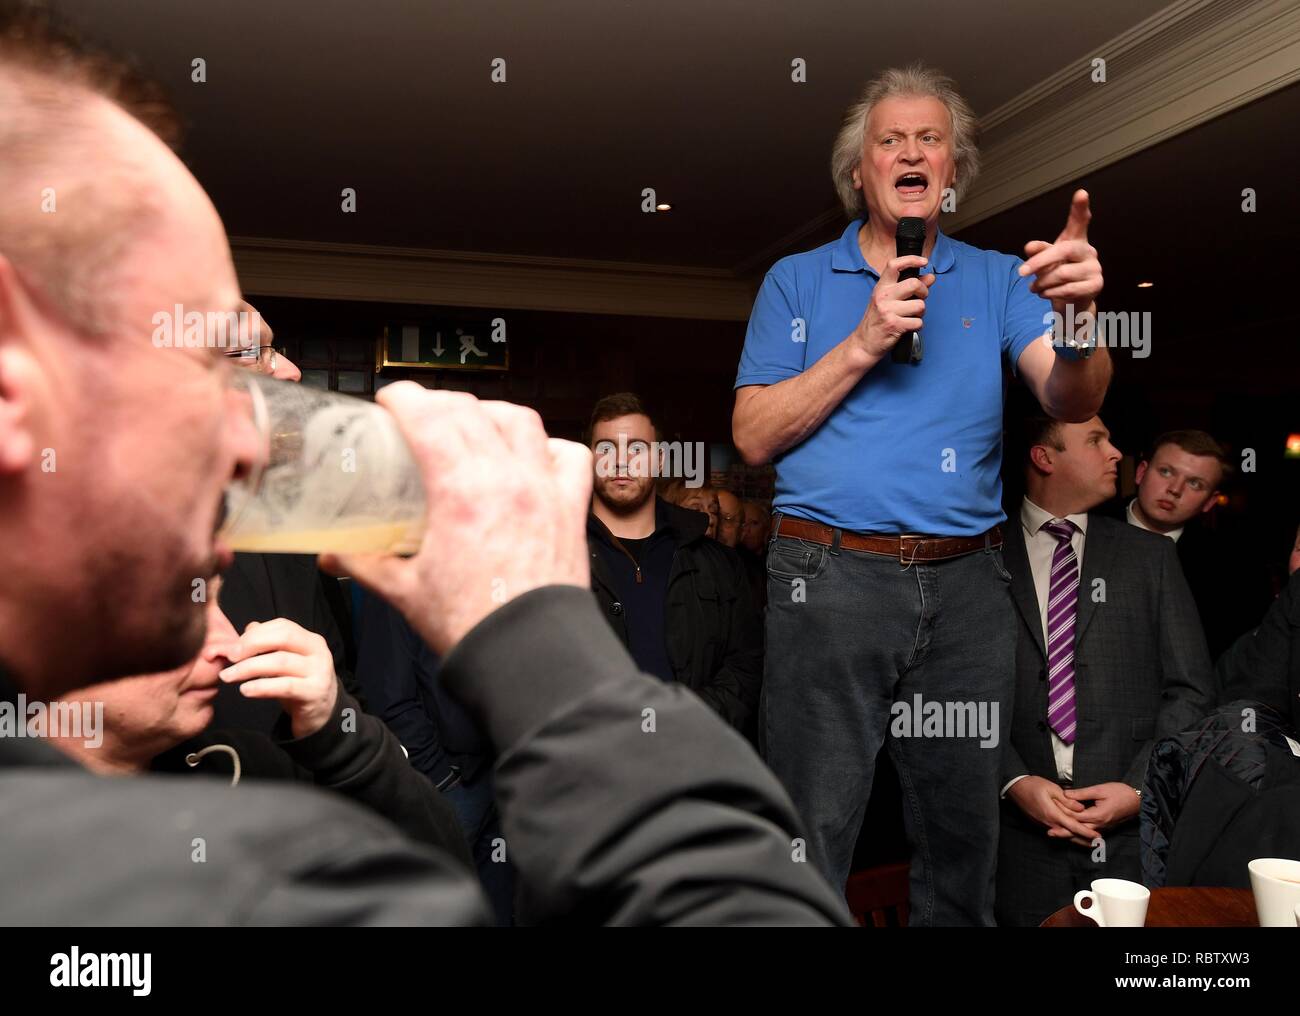 Tim Martin, founder of pub chain Wetherspoon, visits The Swan pub in Weymouth during his nationwide tour of his Wetherspoon's pubs to talk about a no deal Brexit Credit: Finnbarr Webster/Alamy Live News Stock Photo